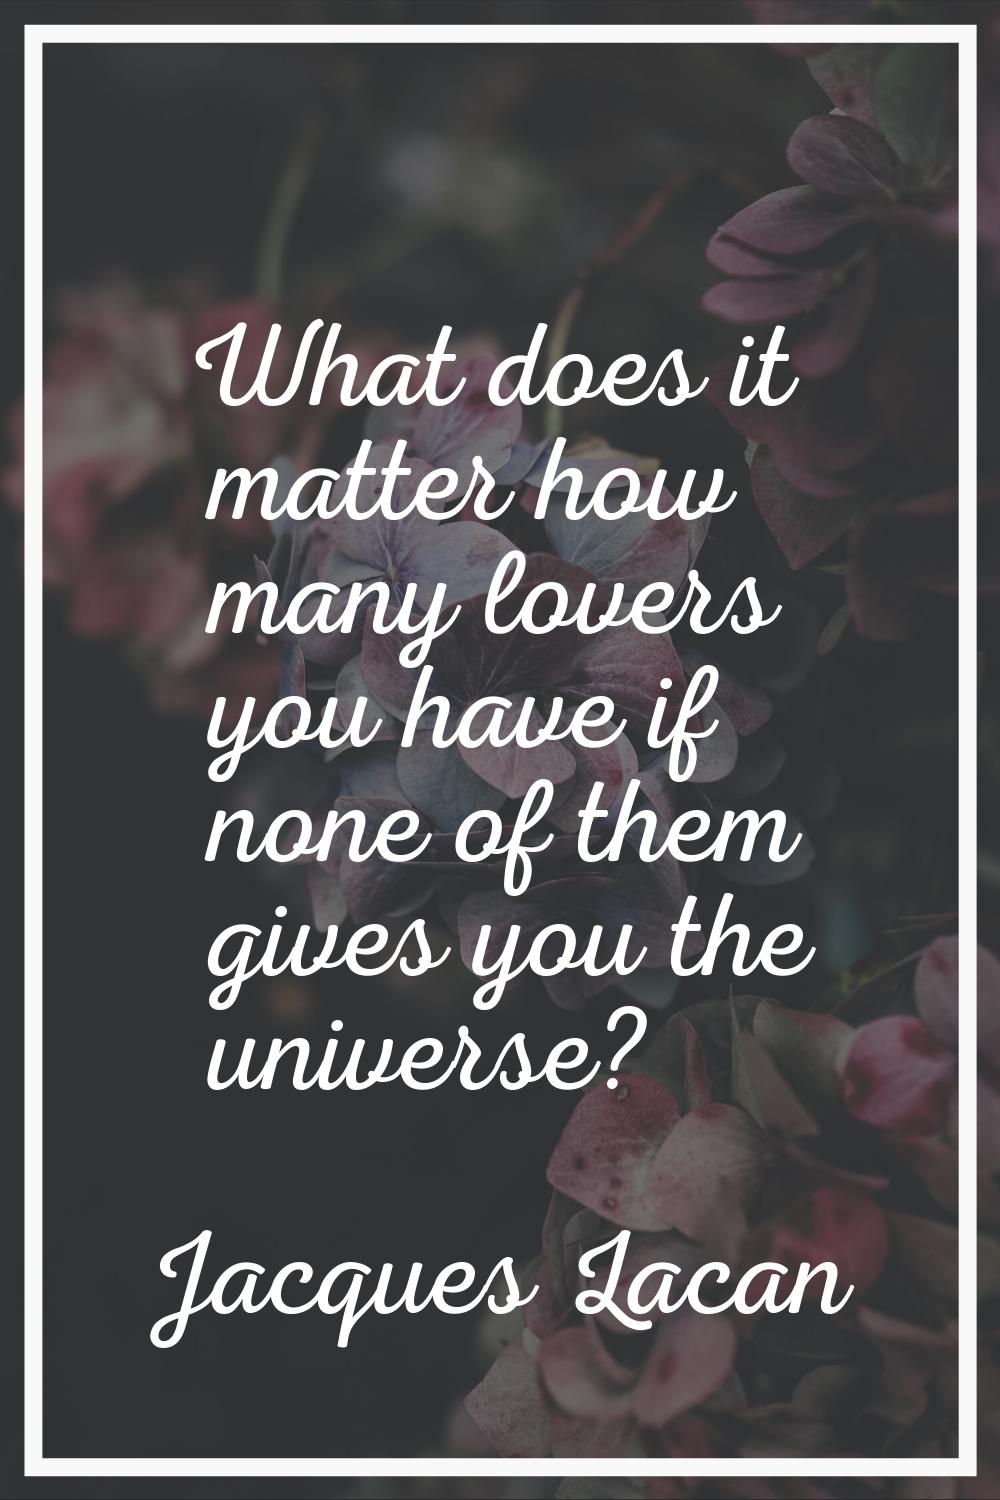 What does it matter how many lovers you have if none of them gives you the universe?